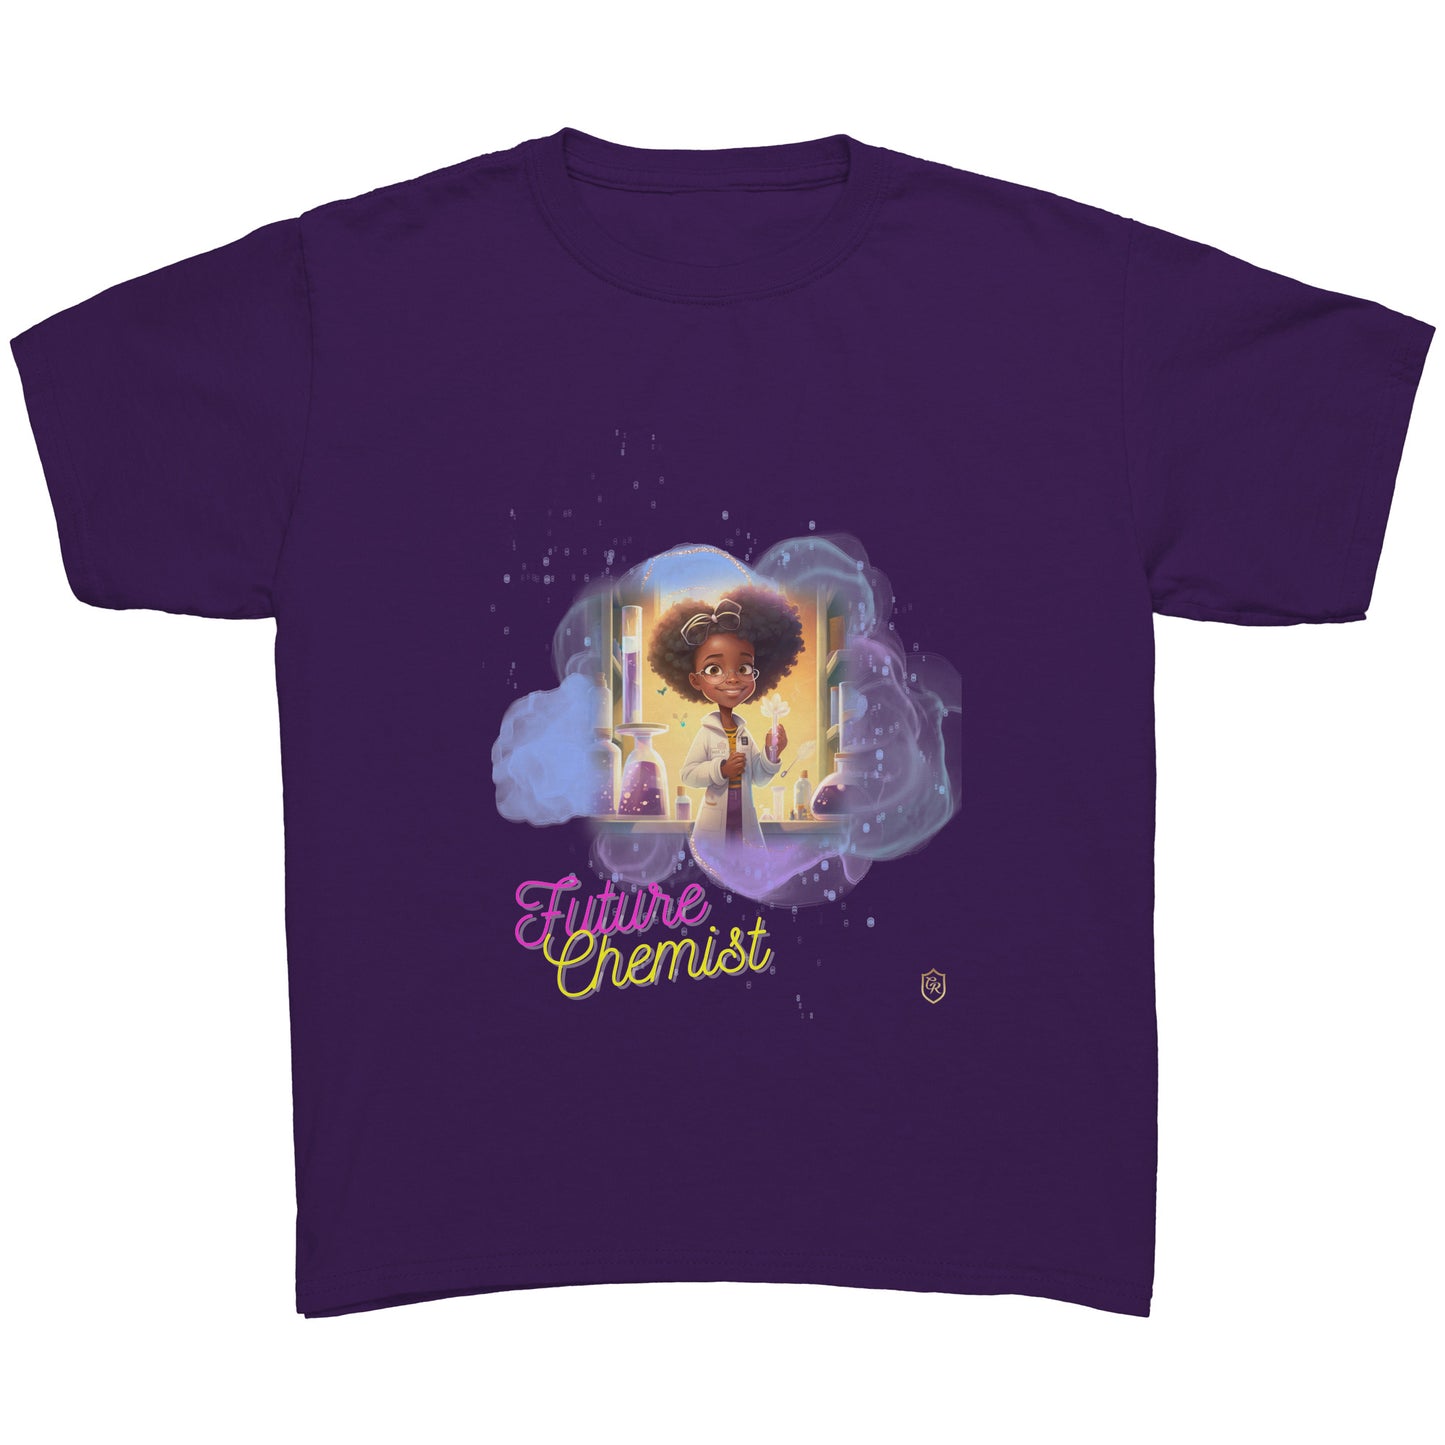 Young Girl's Chemist of Tomorrow T-shirt